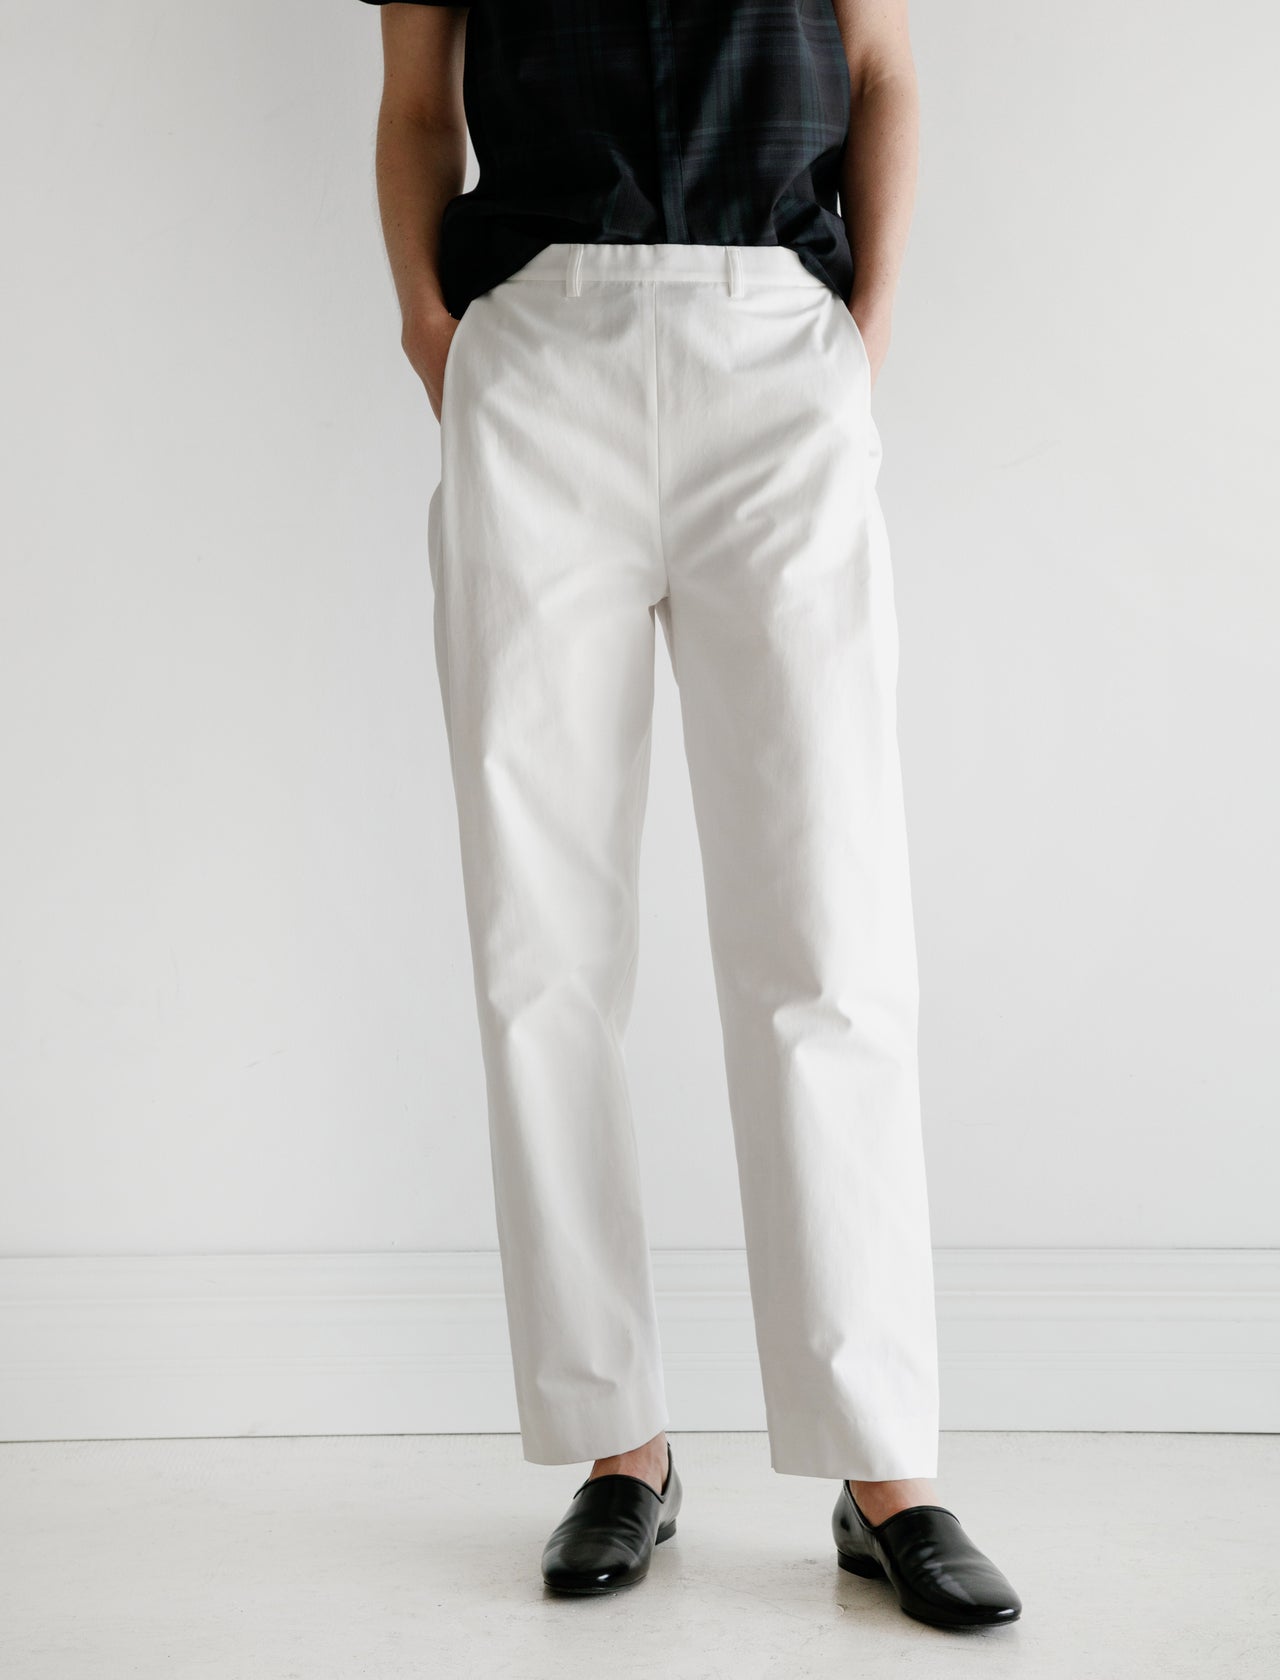 Stephan Schneider Trousers Visible White – Neighbour